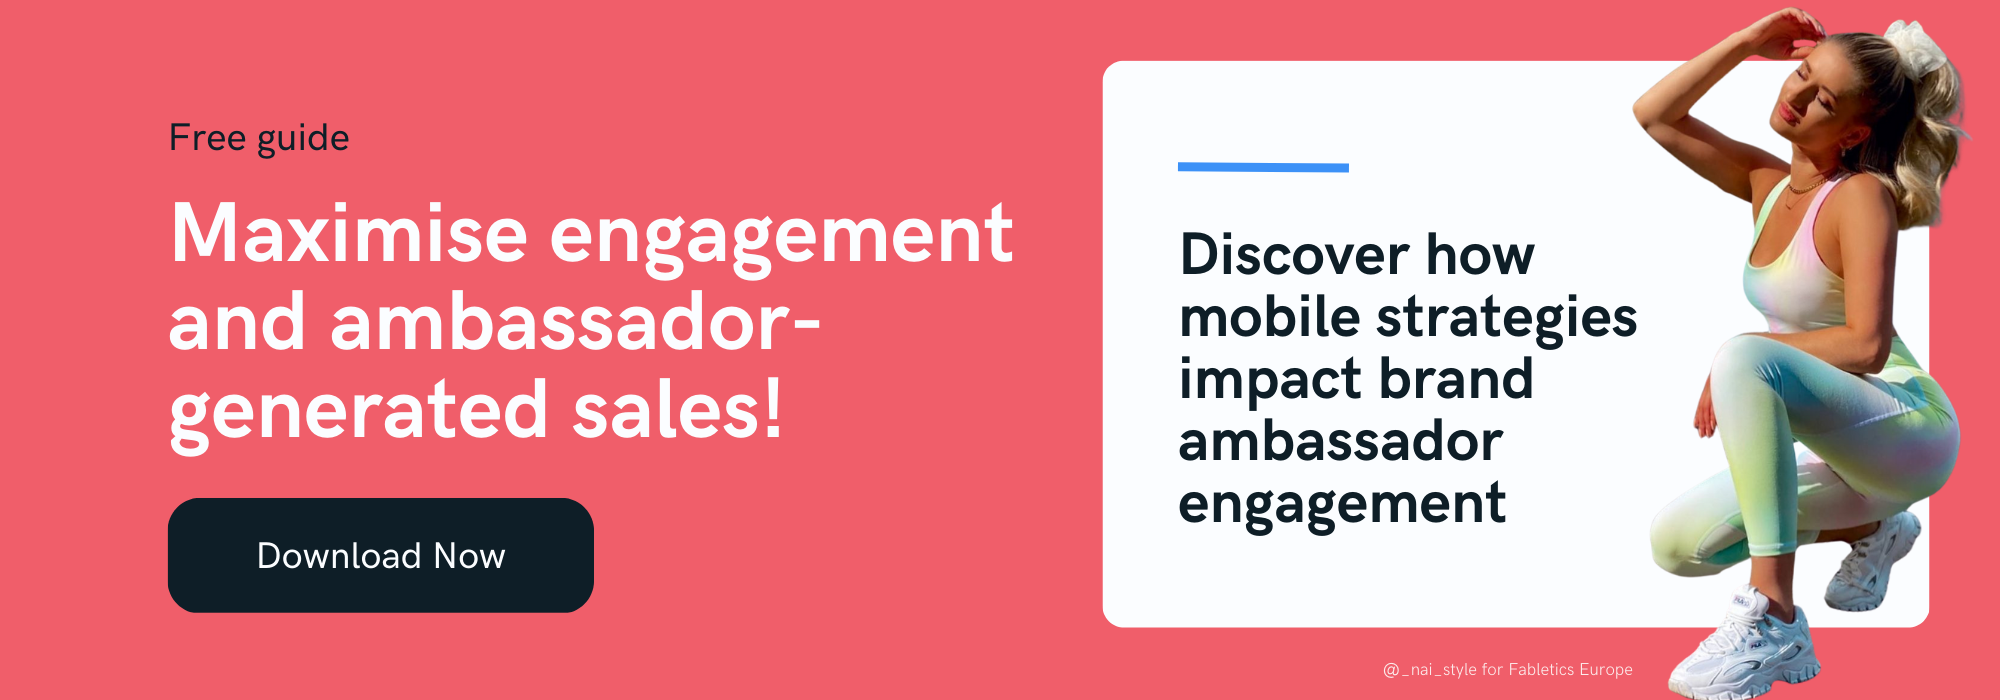 5 Reasons You Need a Dedicated App for Your Brand Ambassadors